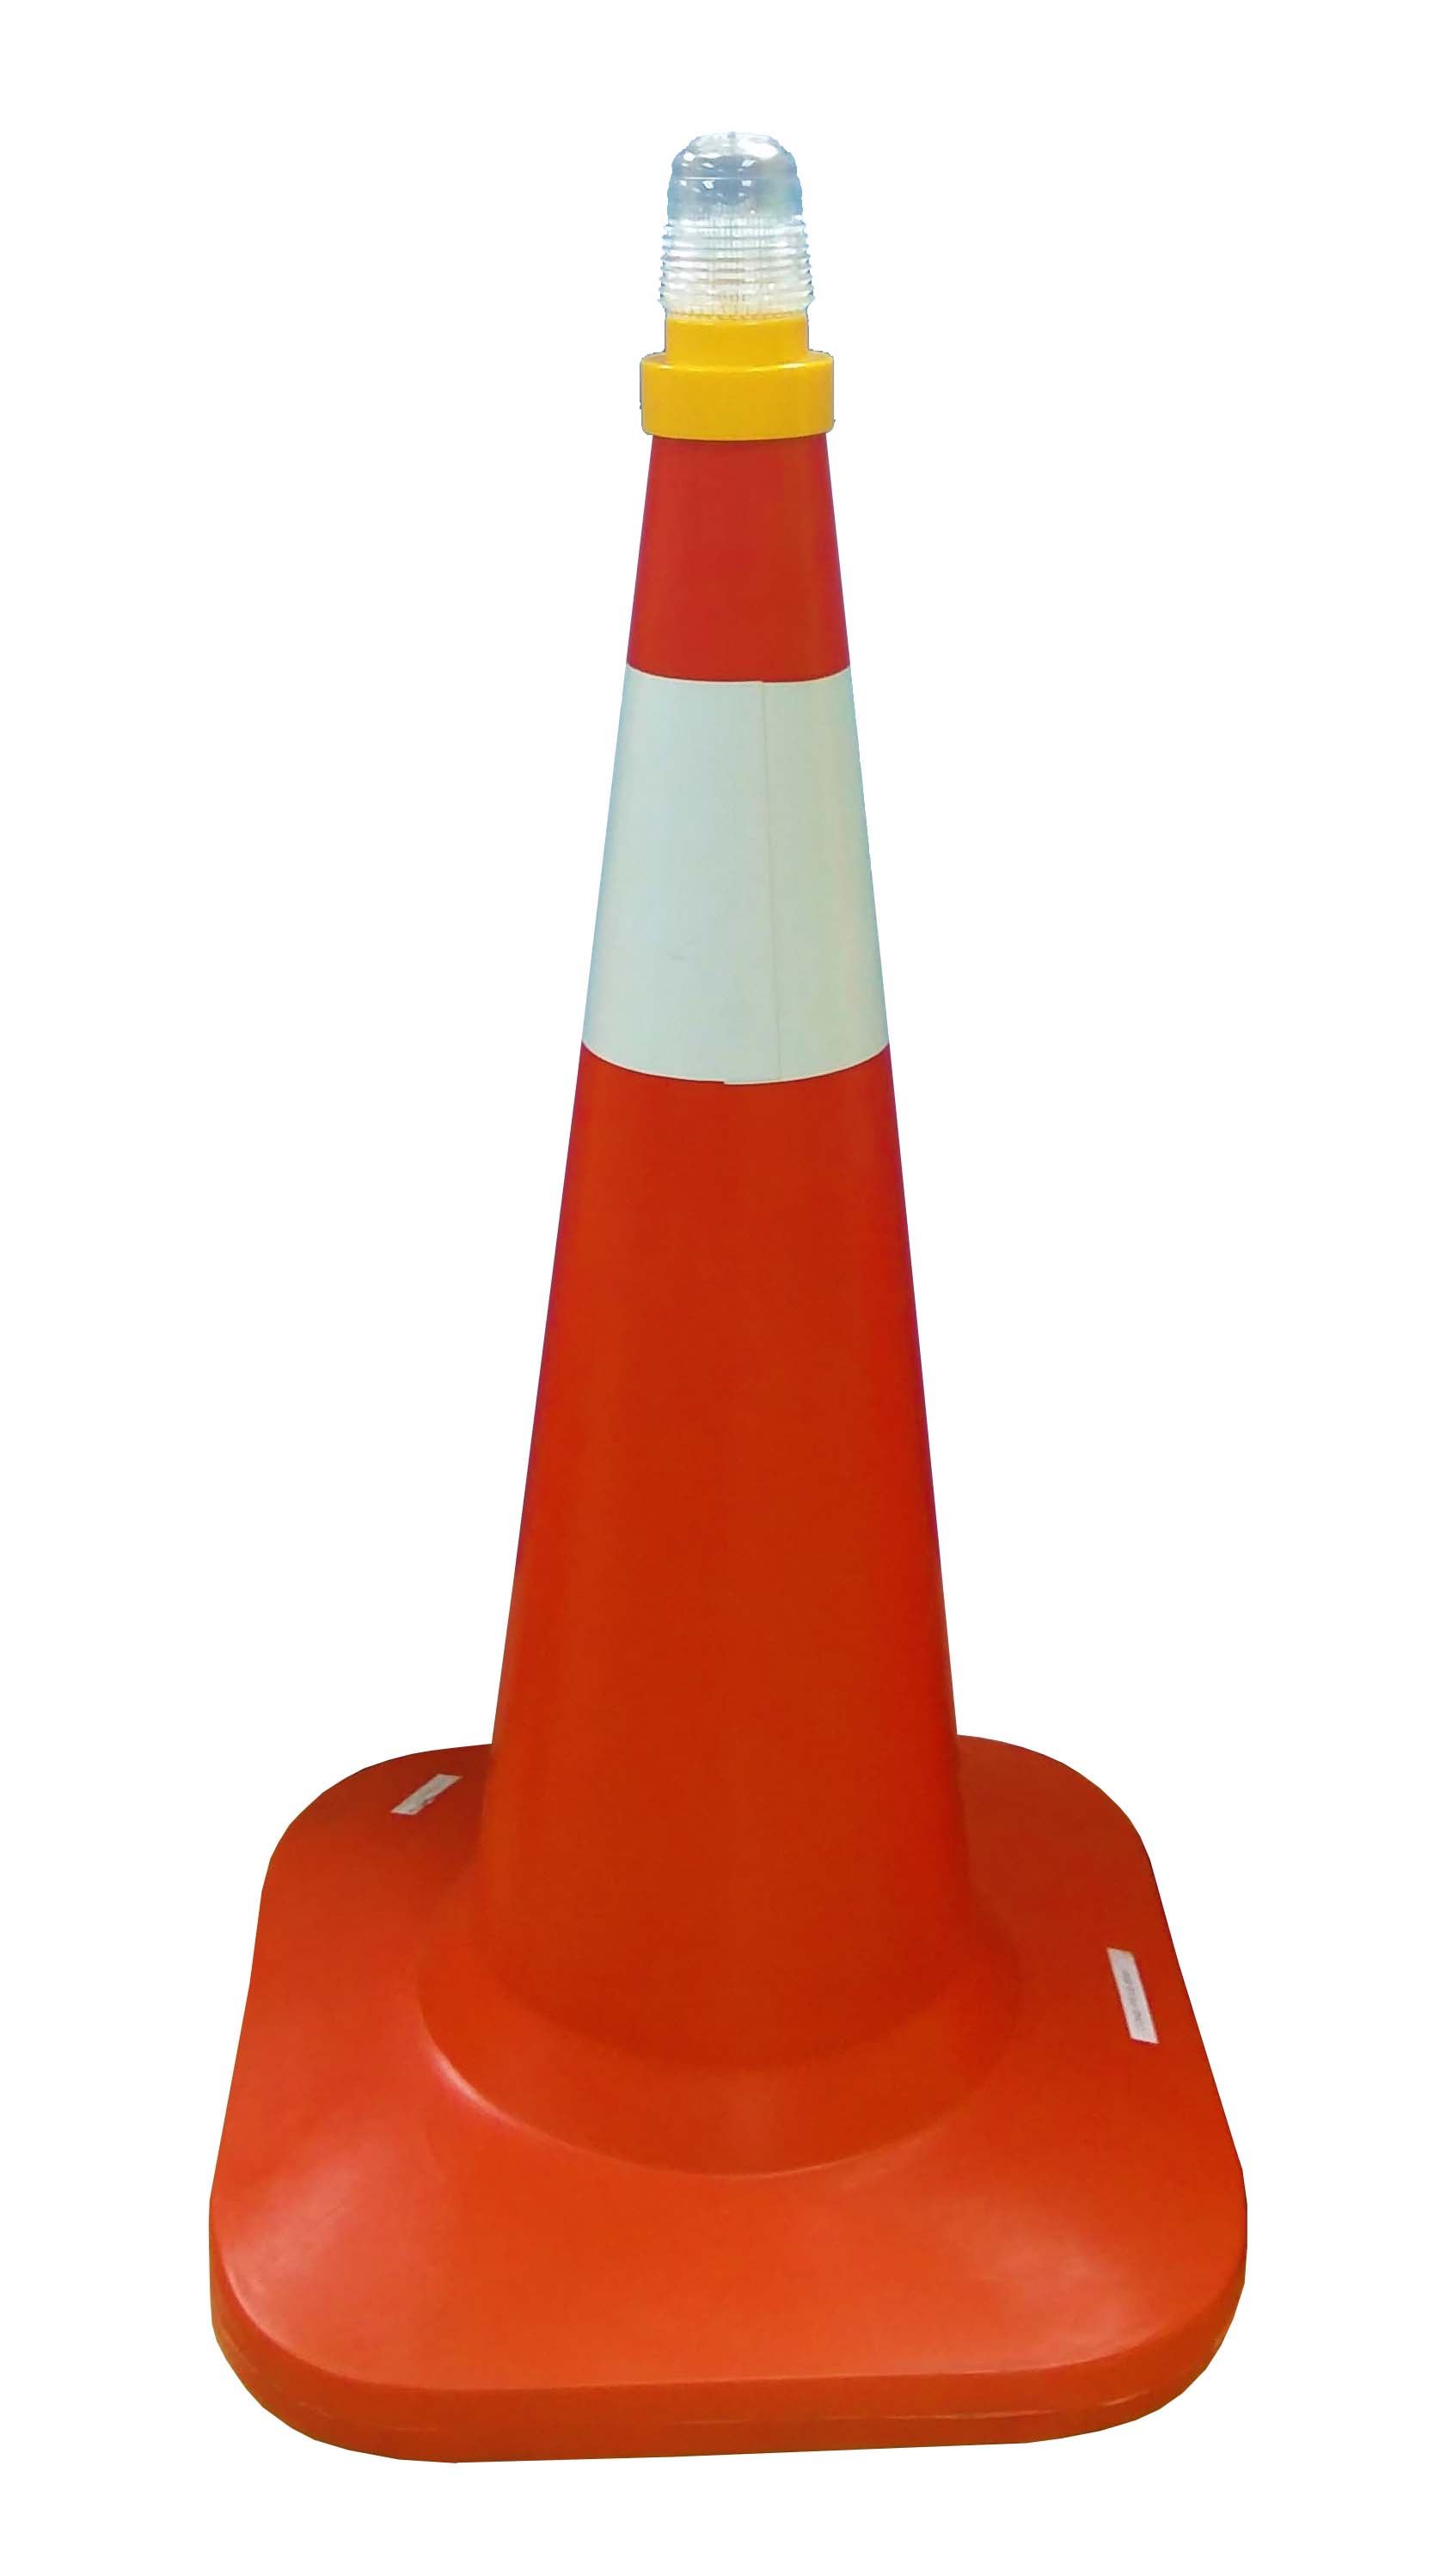 Blinker on Top of Cone